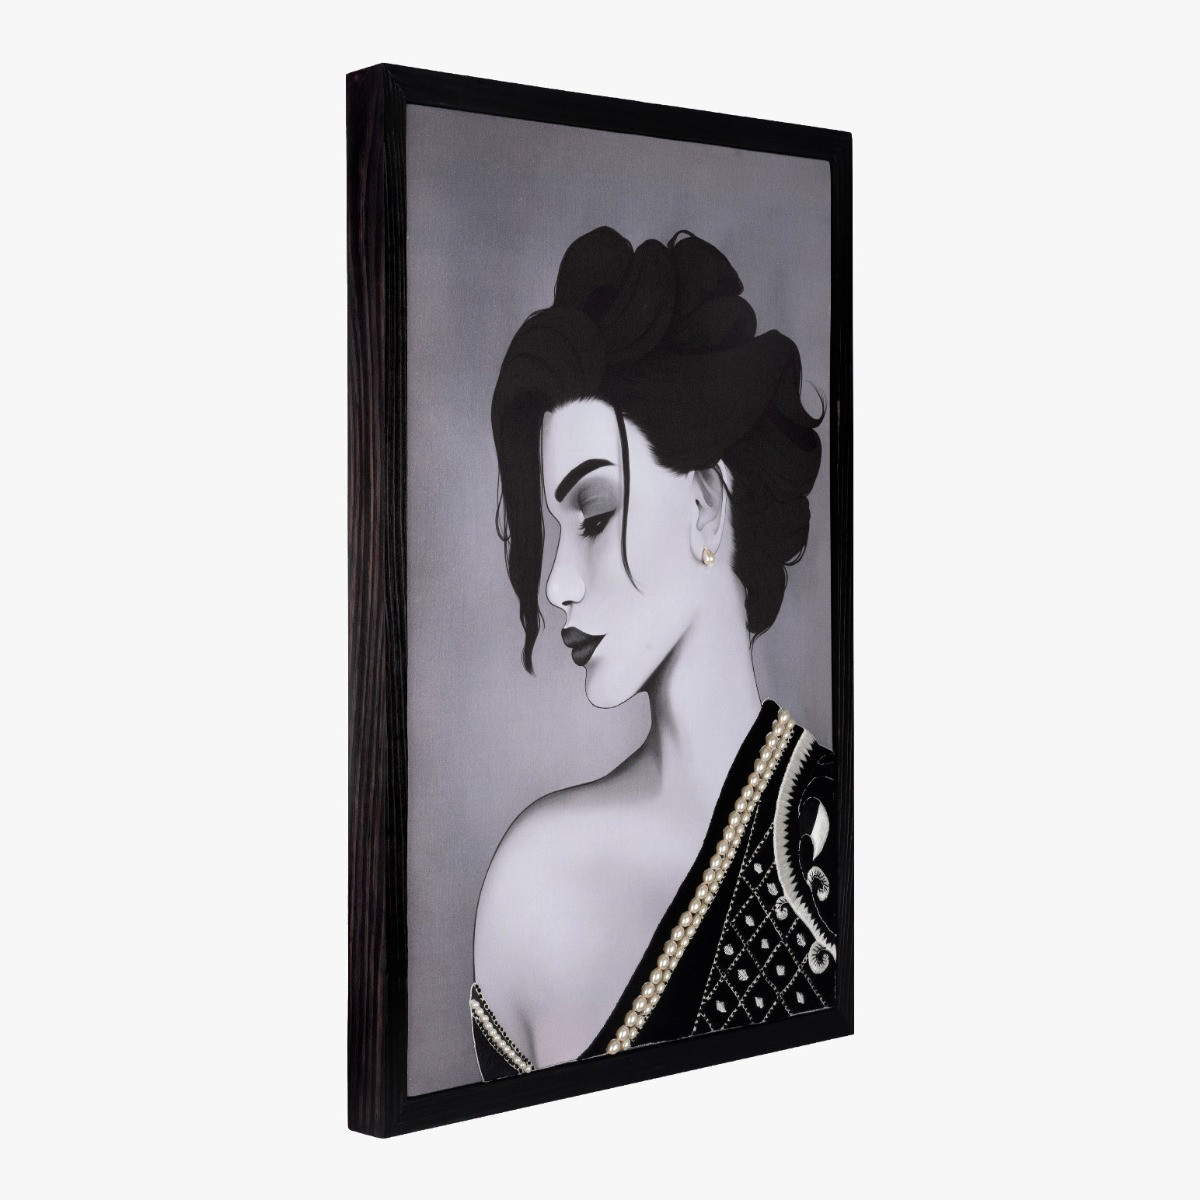 side view of framed figurative artwork in black and white 